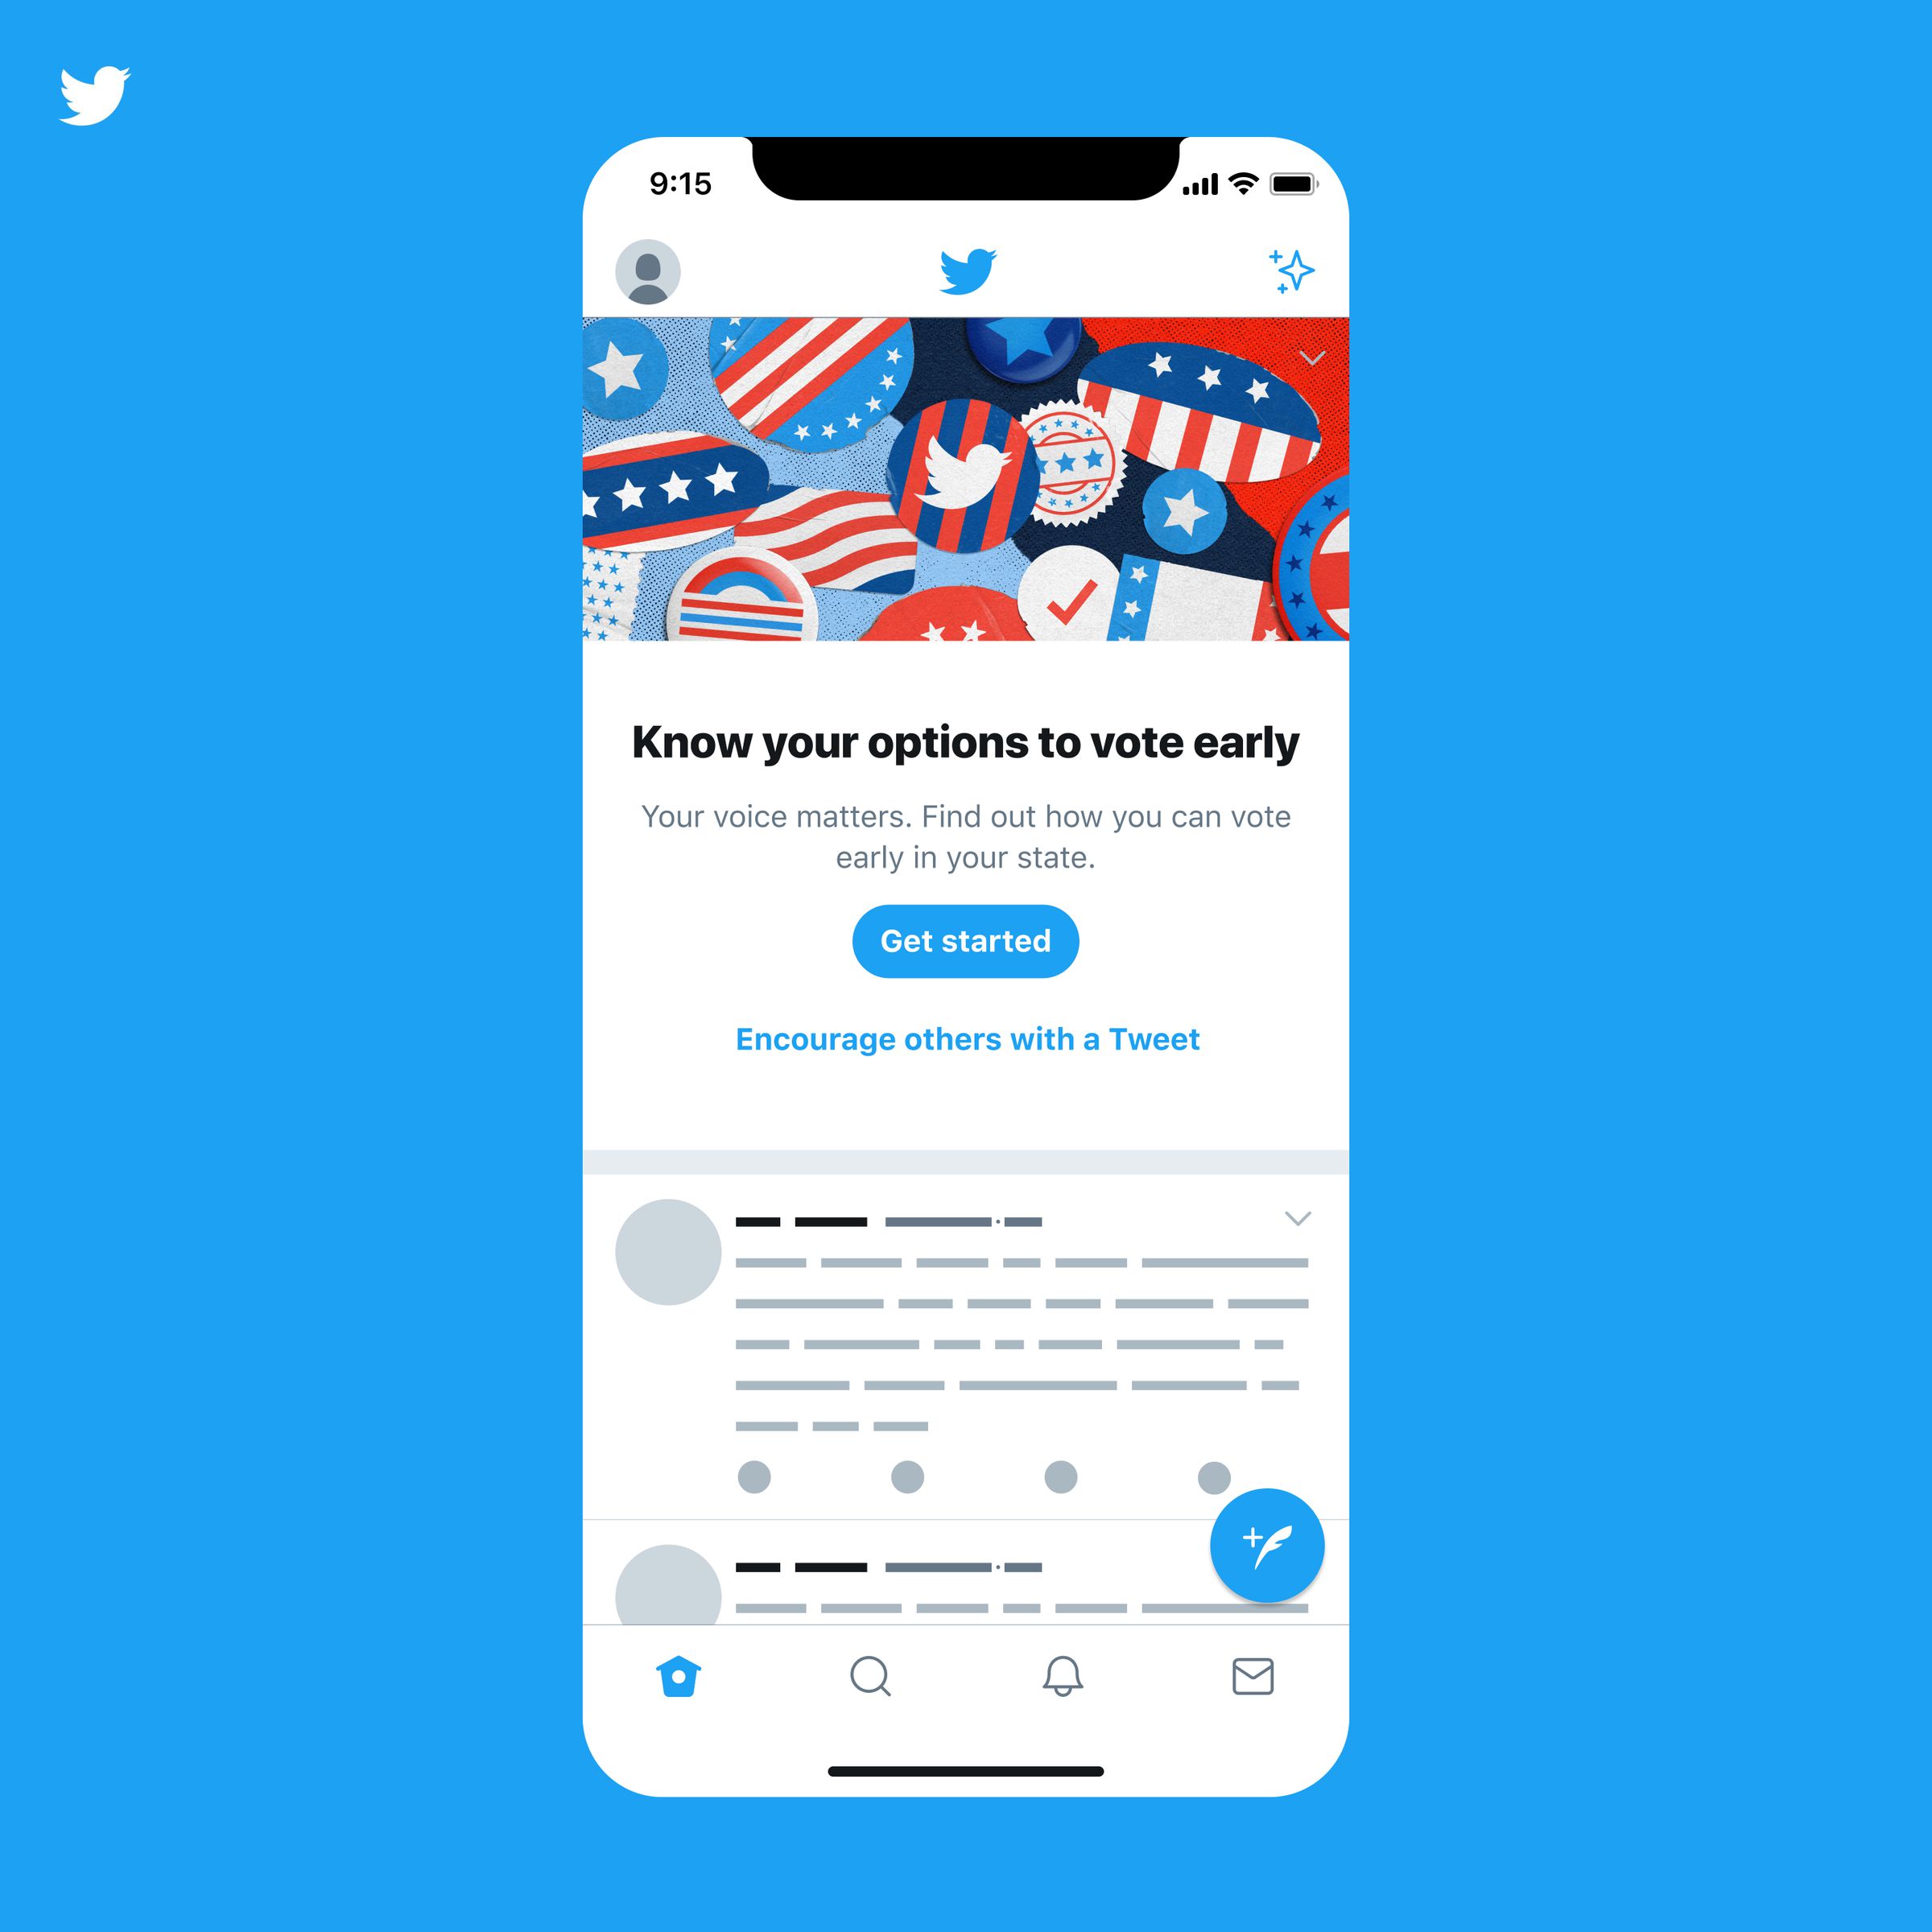 Twitter is adding features to encourage early voting